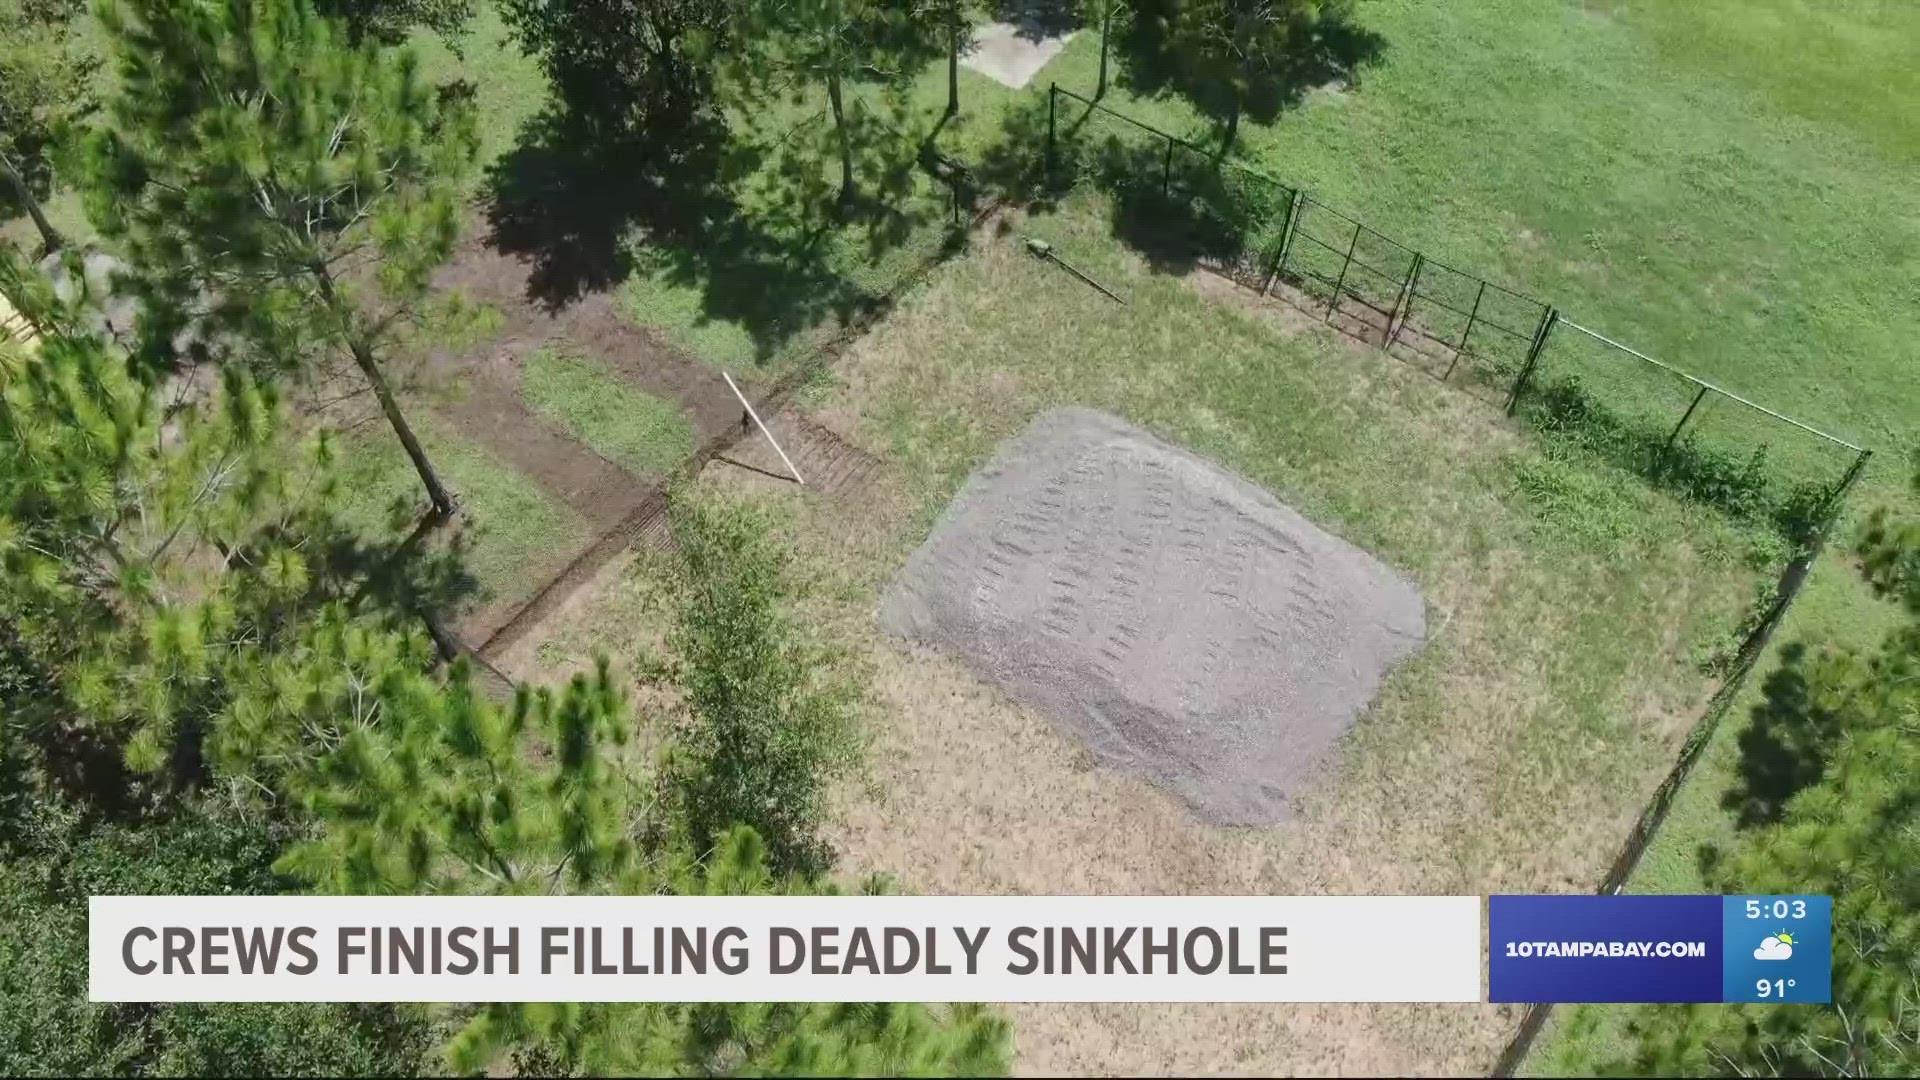 A picture shows the sinkhole, in which the area surrounding it has been fenced, refilled and flattened out at ground level.